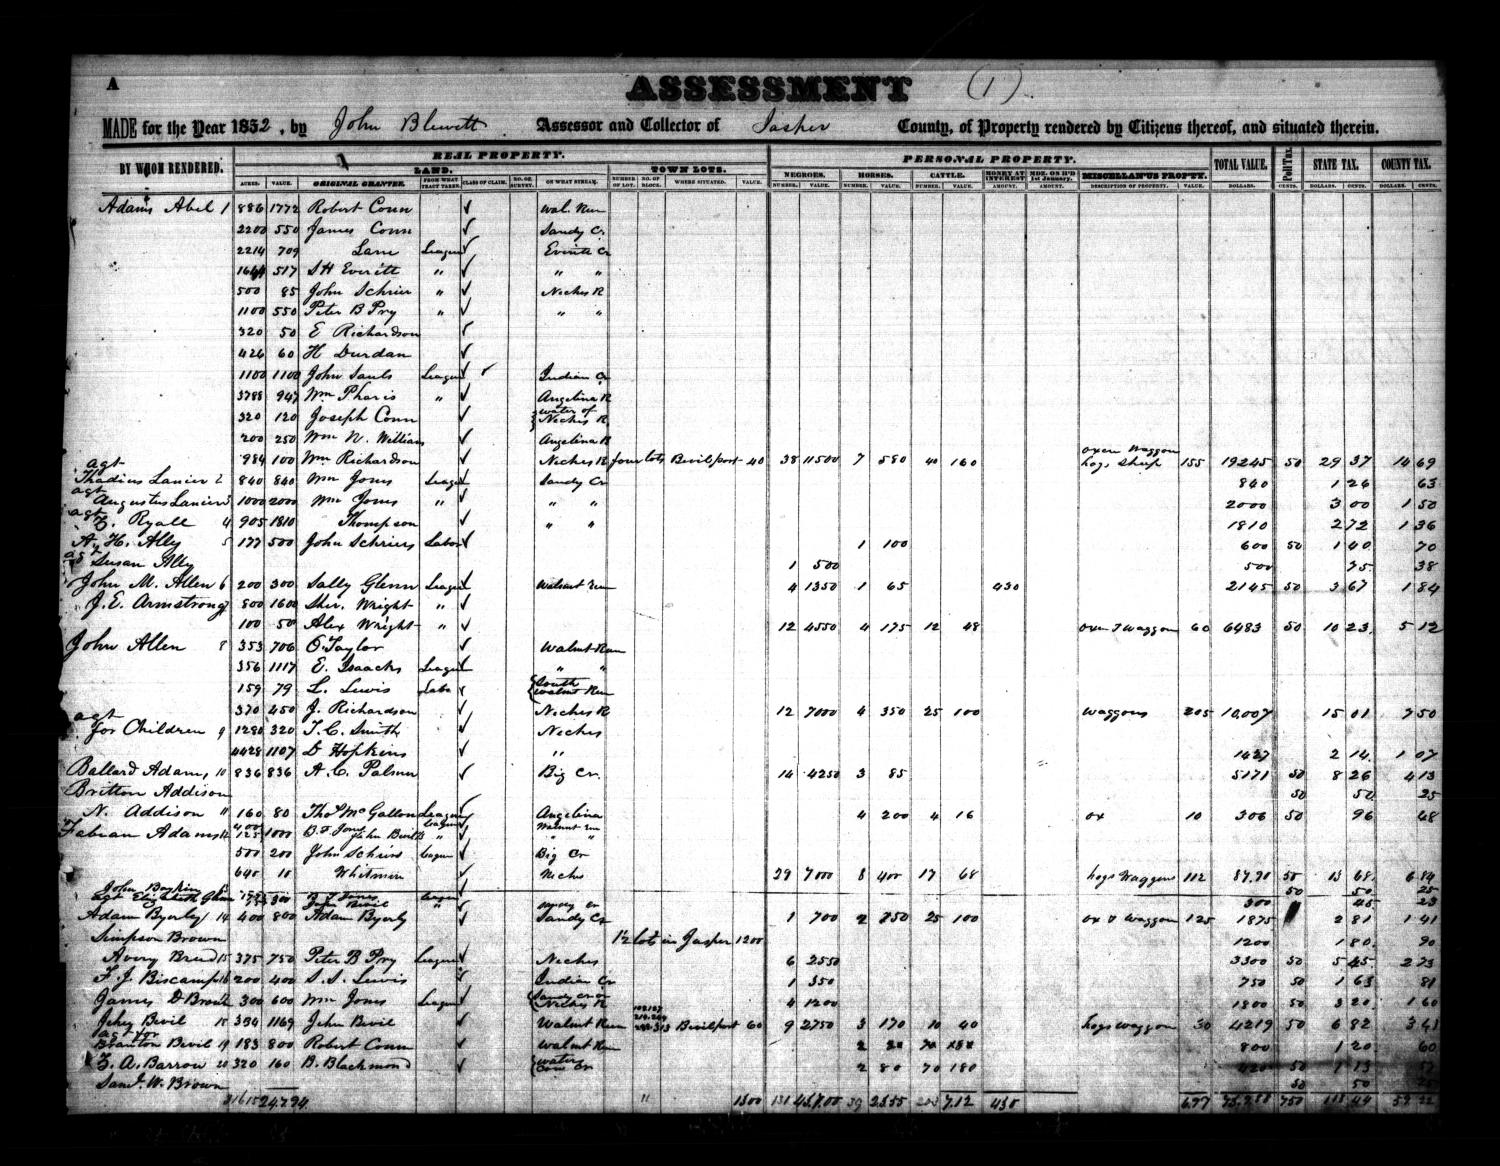 [Jasper County, Texas Tax Roll 1852] Page 1 of 20 The Portal to